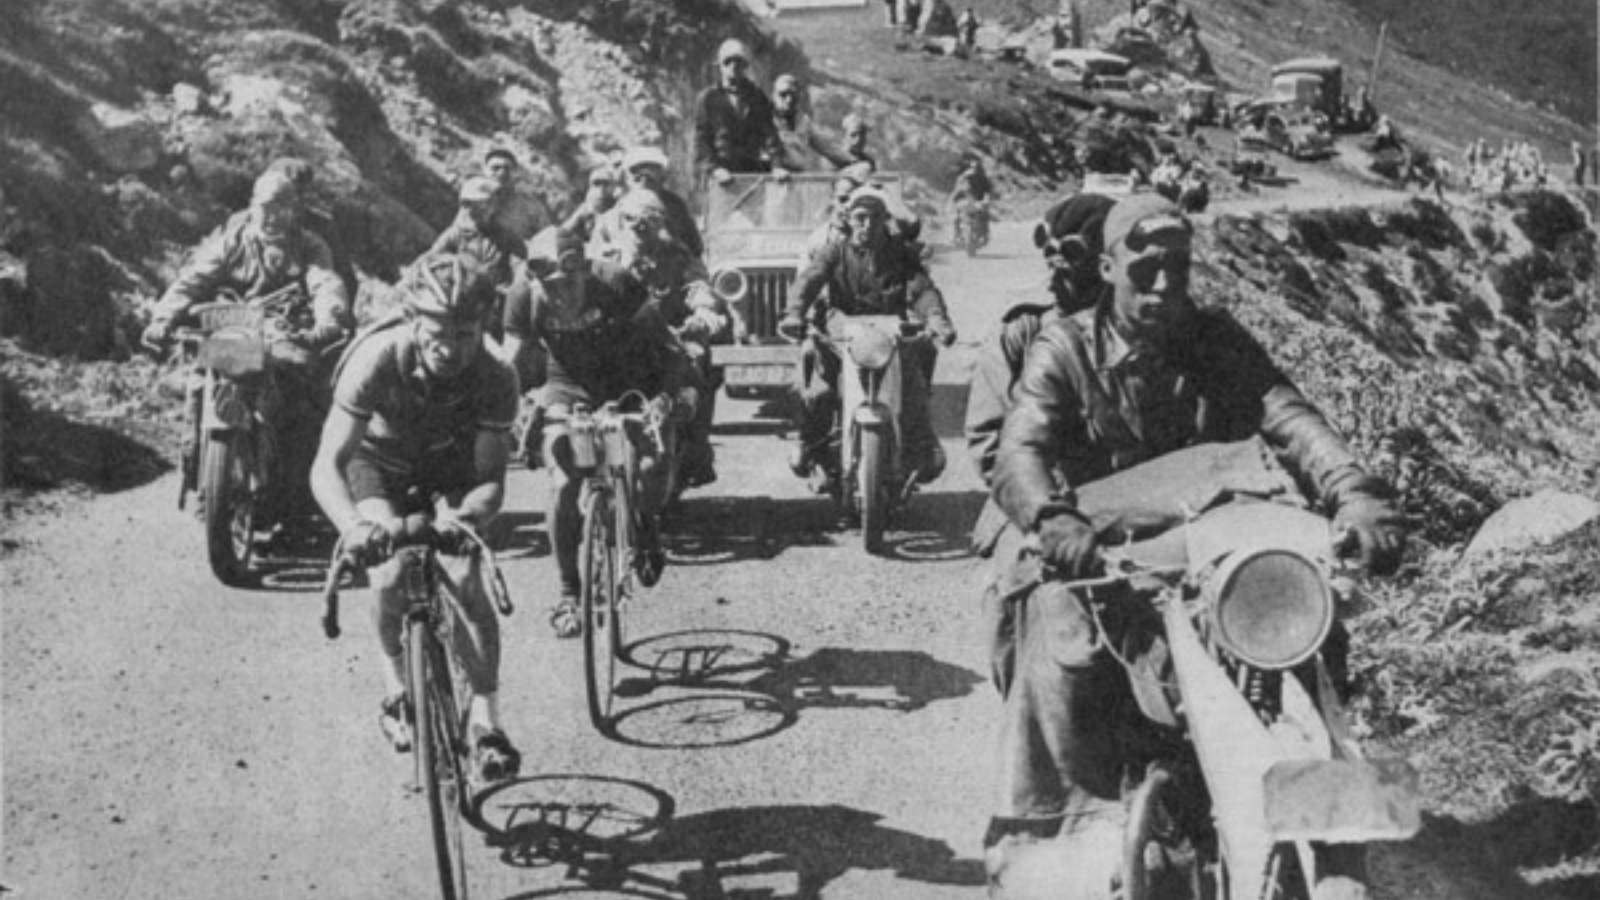 French cyclist Jean Robic, winner of Tour de France 1947 riding at the front on the group of cyclists